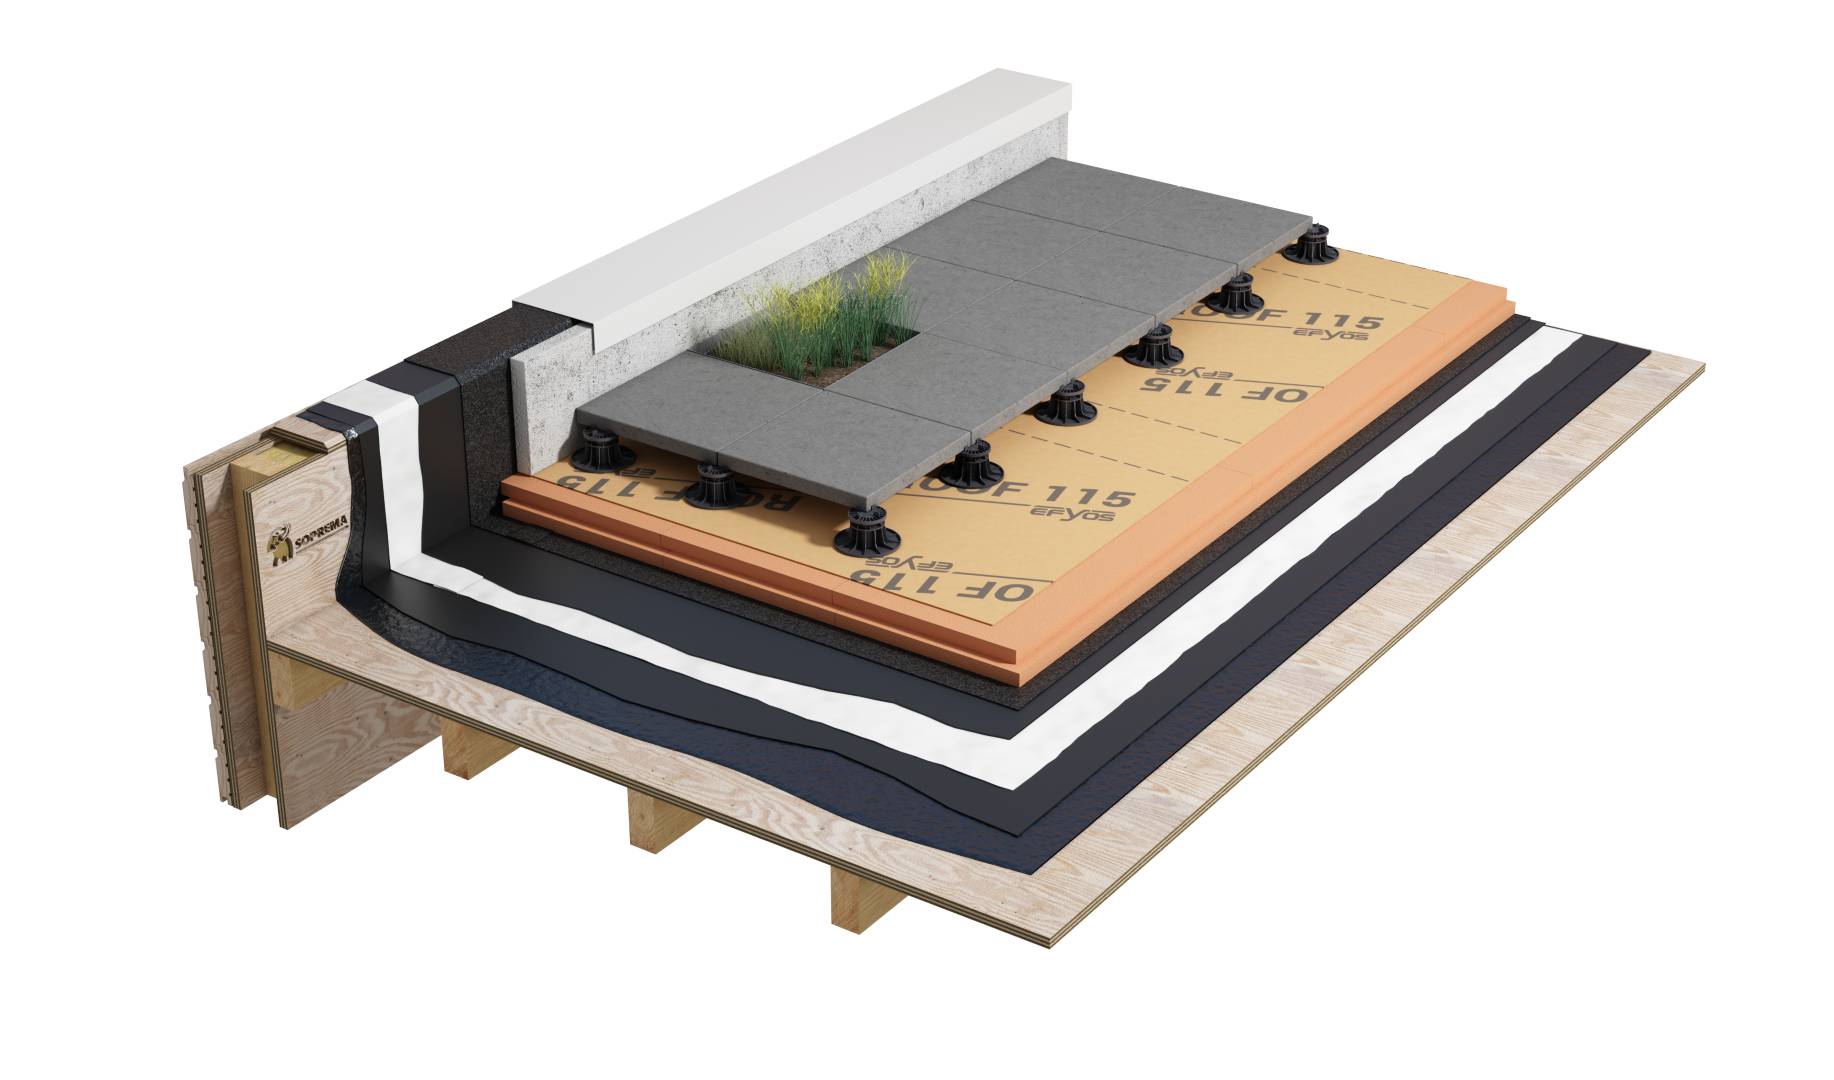 Duoflex - Double Pour Hot Melt Inverted Roof System with Paving Slabs (Timber Deck)